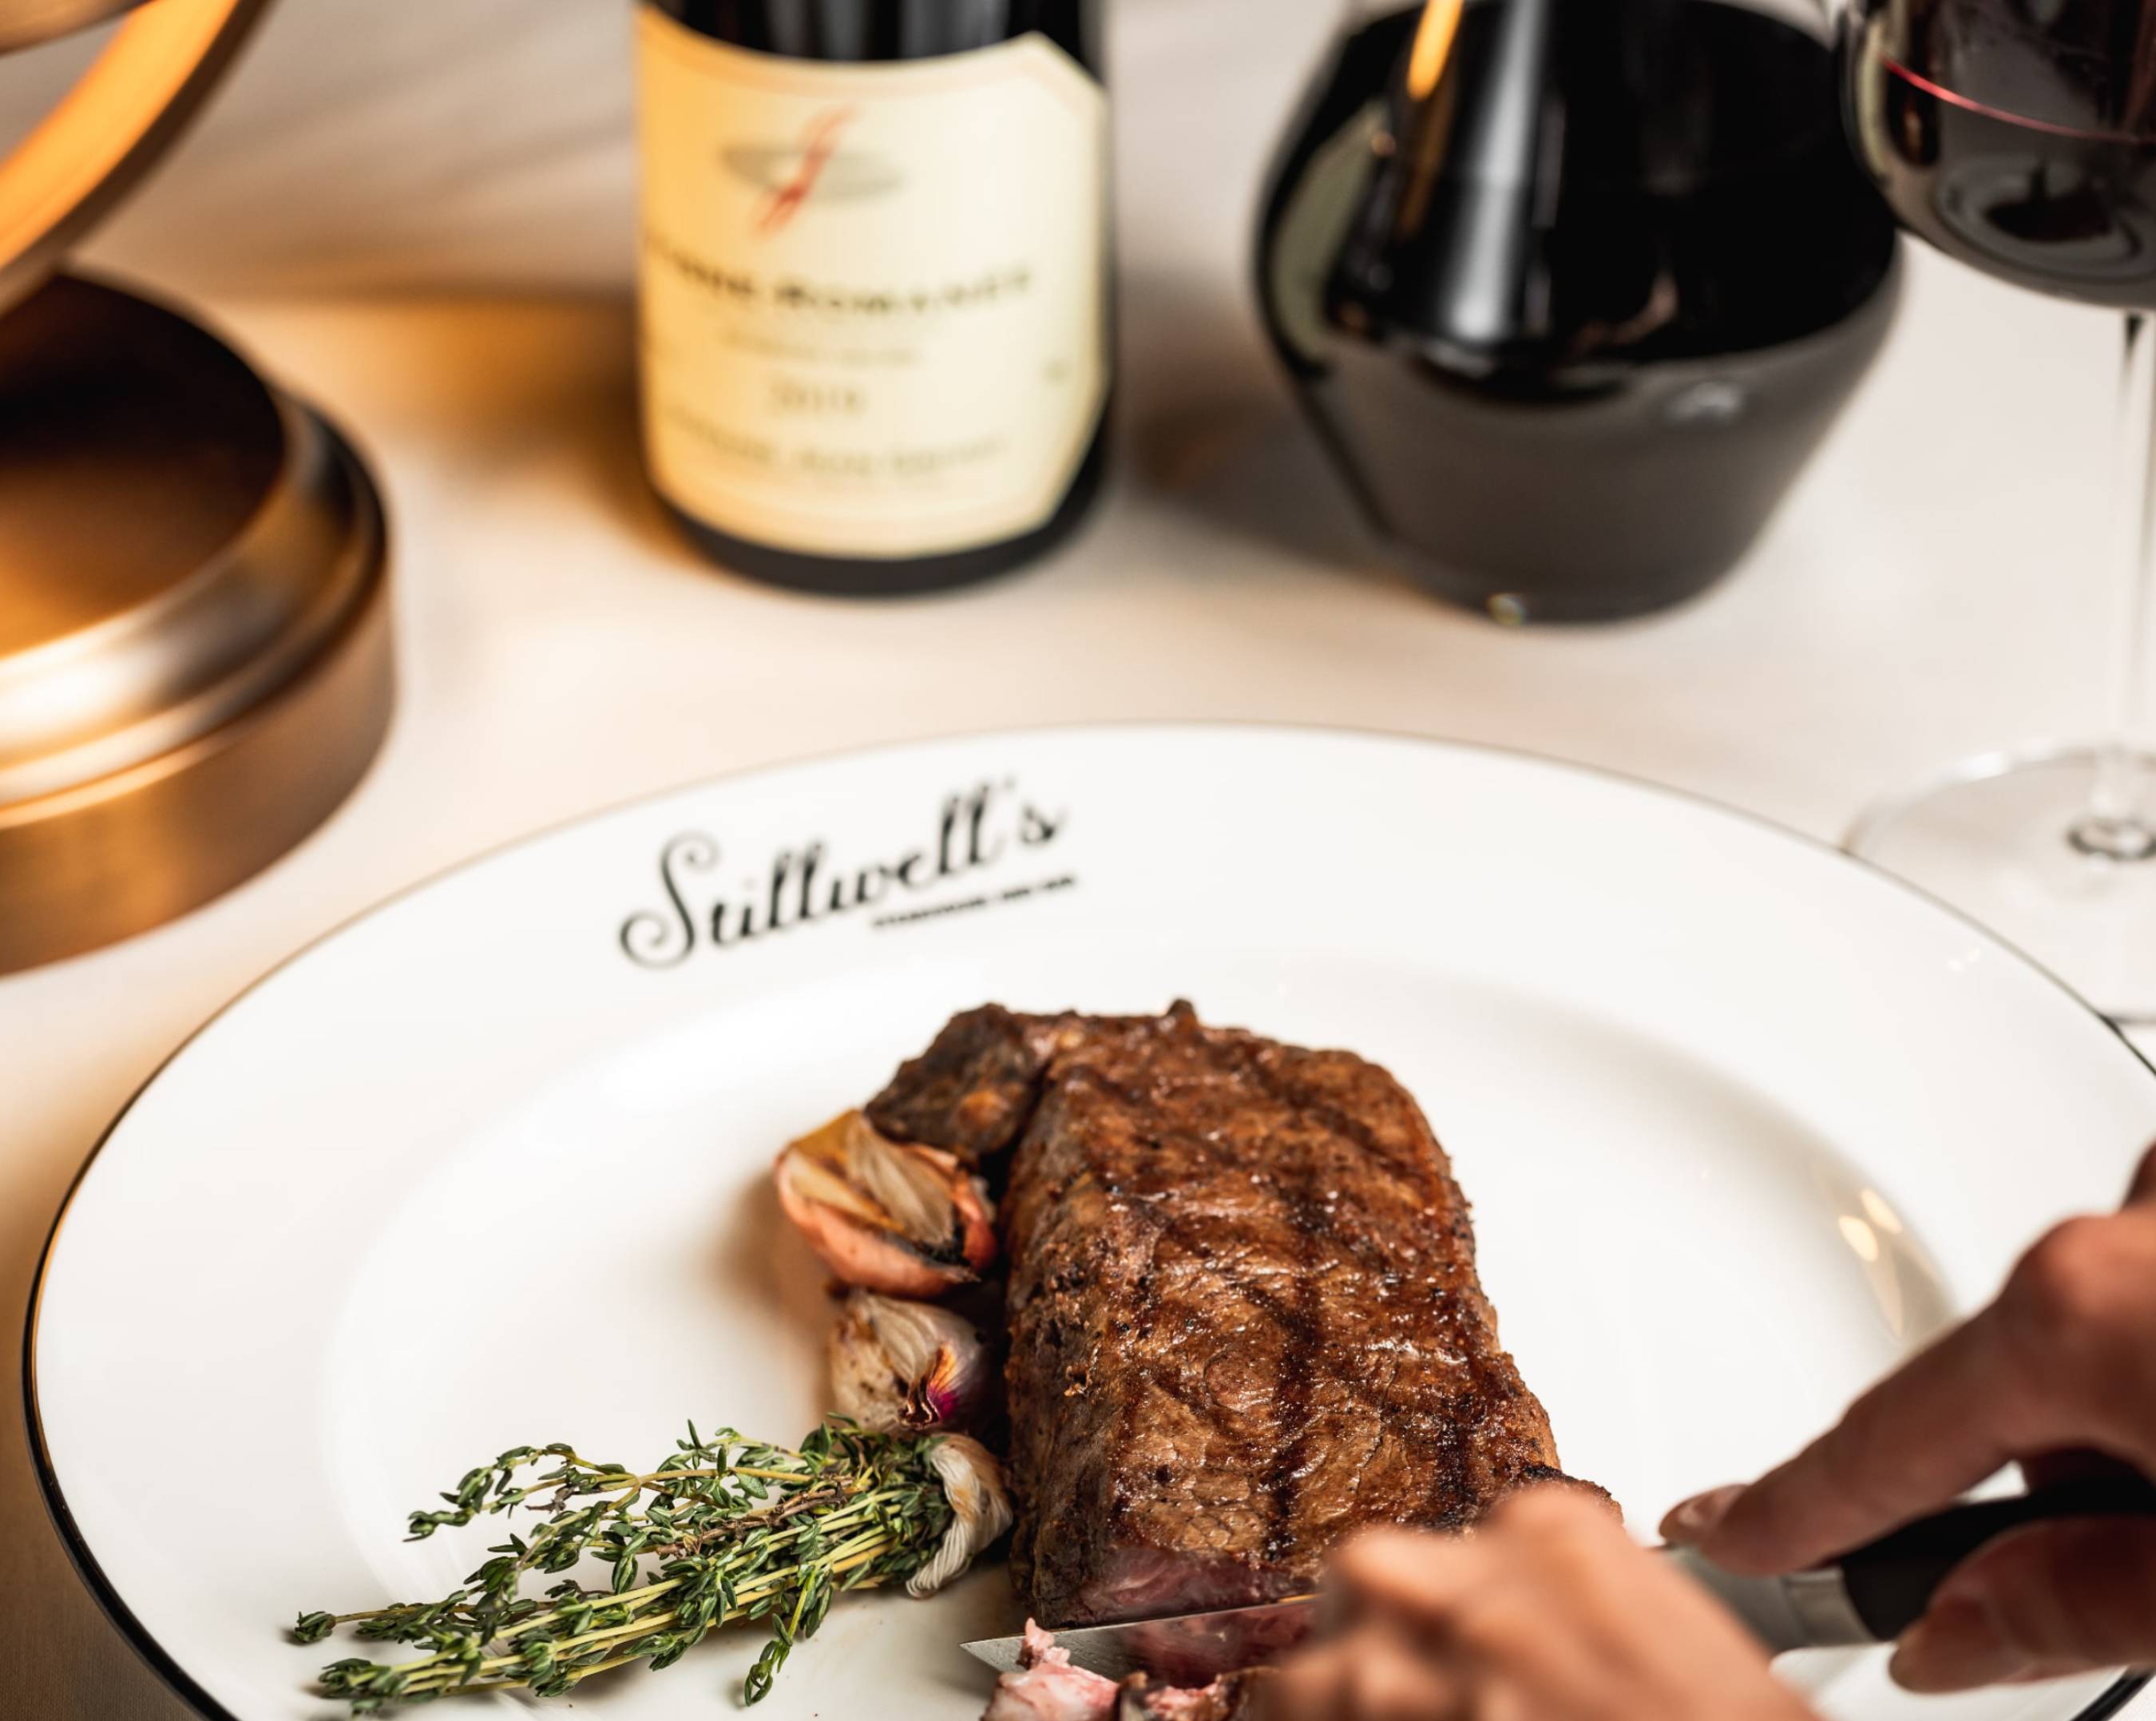 Exclusive Beef Cuts Served at Stillwell's by Samantha Marie Photography